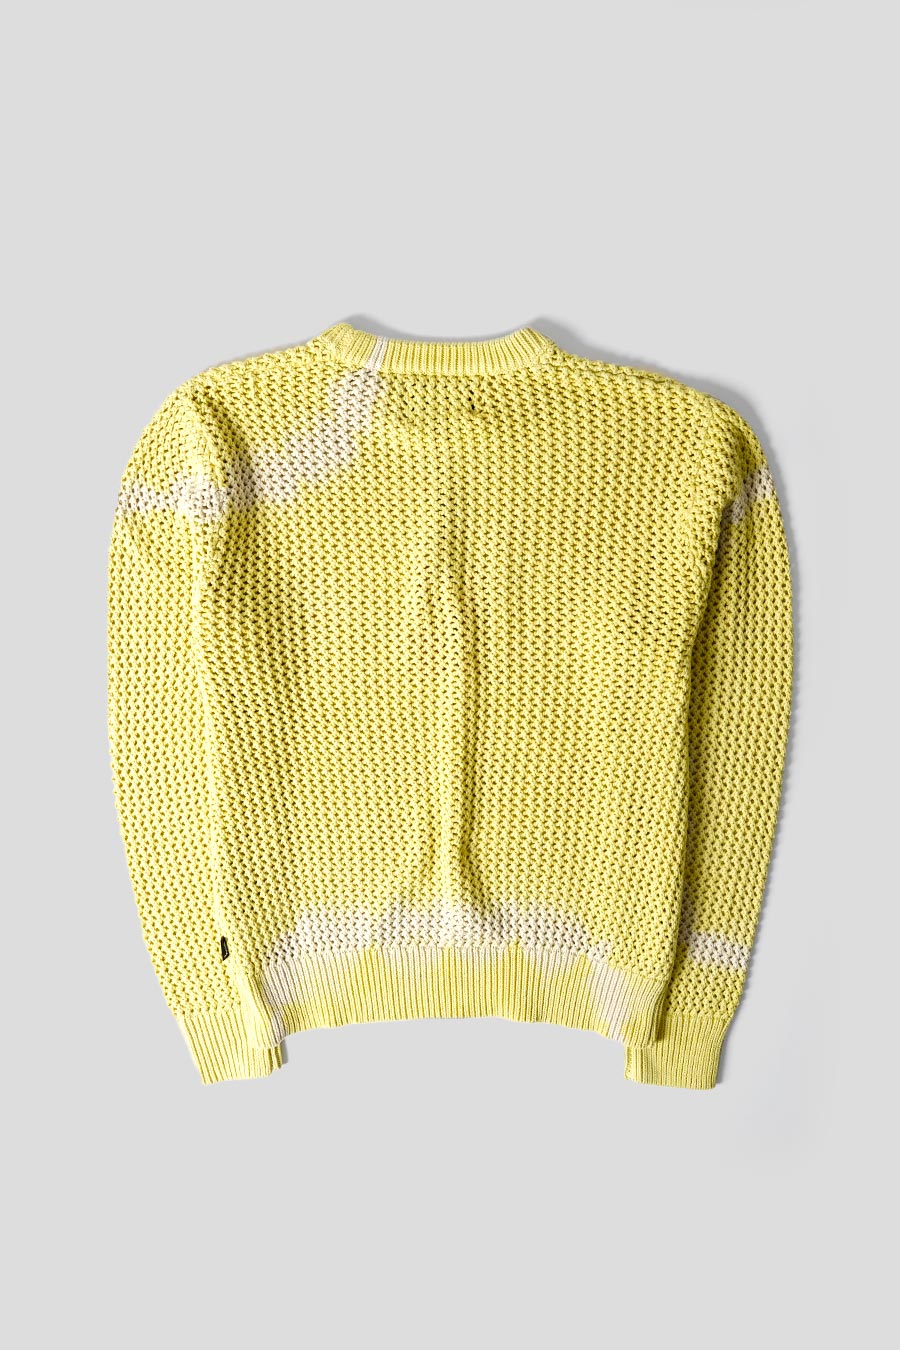 Stüssy   YELLOW PIGMENT DYED LOOSE GAUGE SWEATER – LE LABO STORE